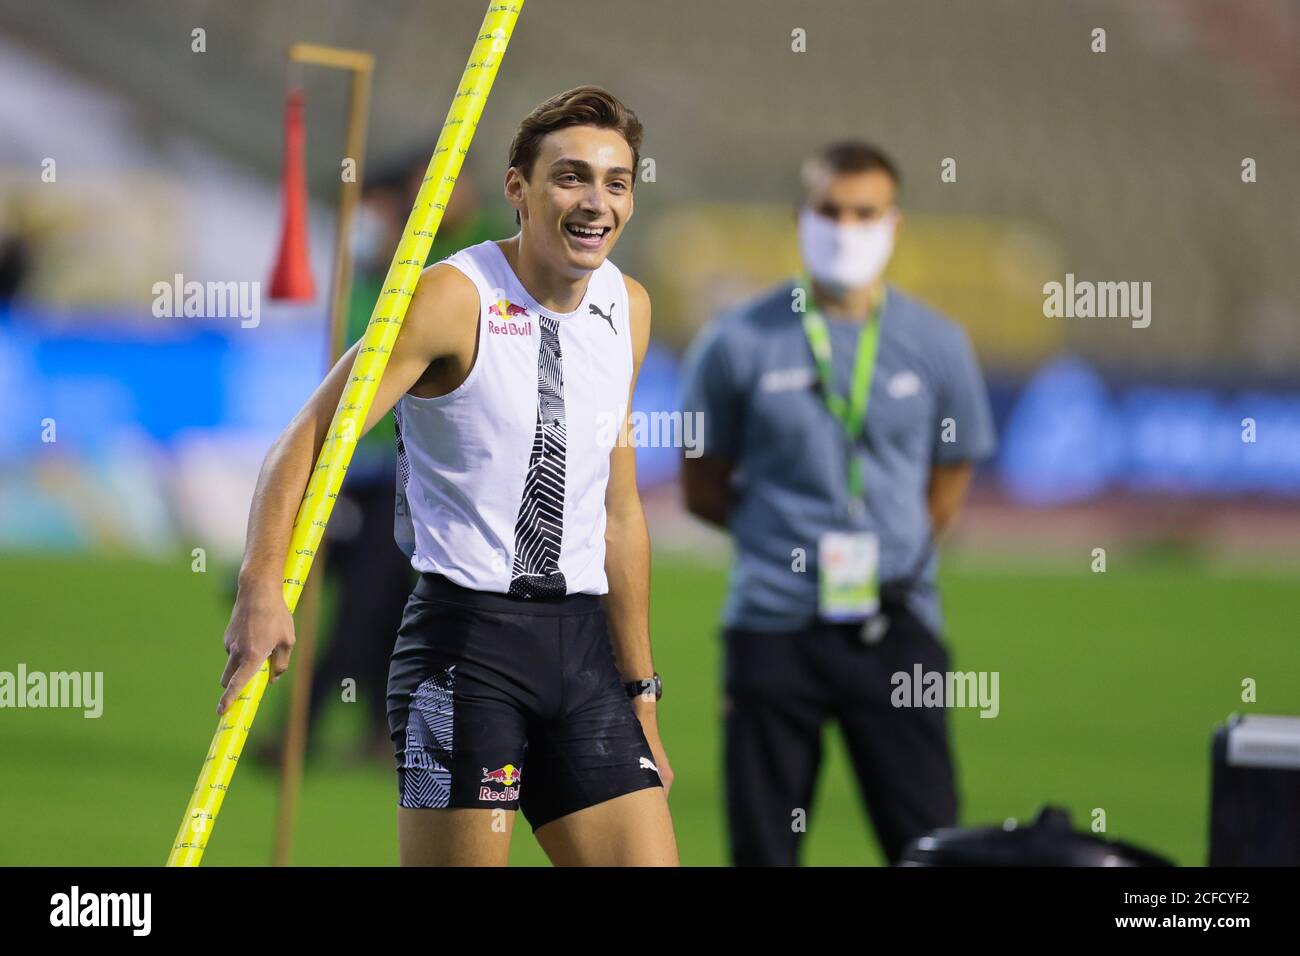 Brussels, Belgium. 4th Sep, 2020. Sweden's Armand Duplantis reacts during the Pole Vault Men at the Diamond League Memorial Van Damme athletics event at the King Baudouin stadium in Brussels, Belgium, Sept. 4, 2020. Credit: Zheng Huansong/Xinhua/Alamy Live News Stock Photo